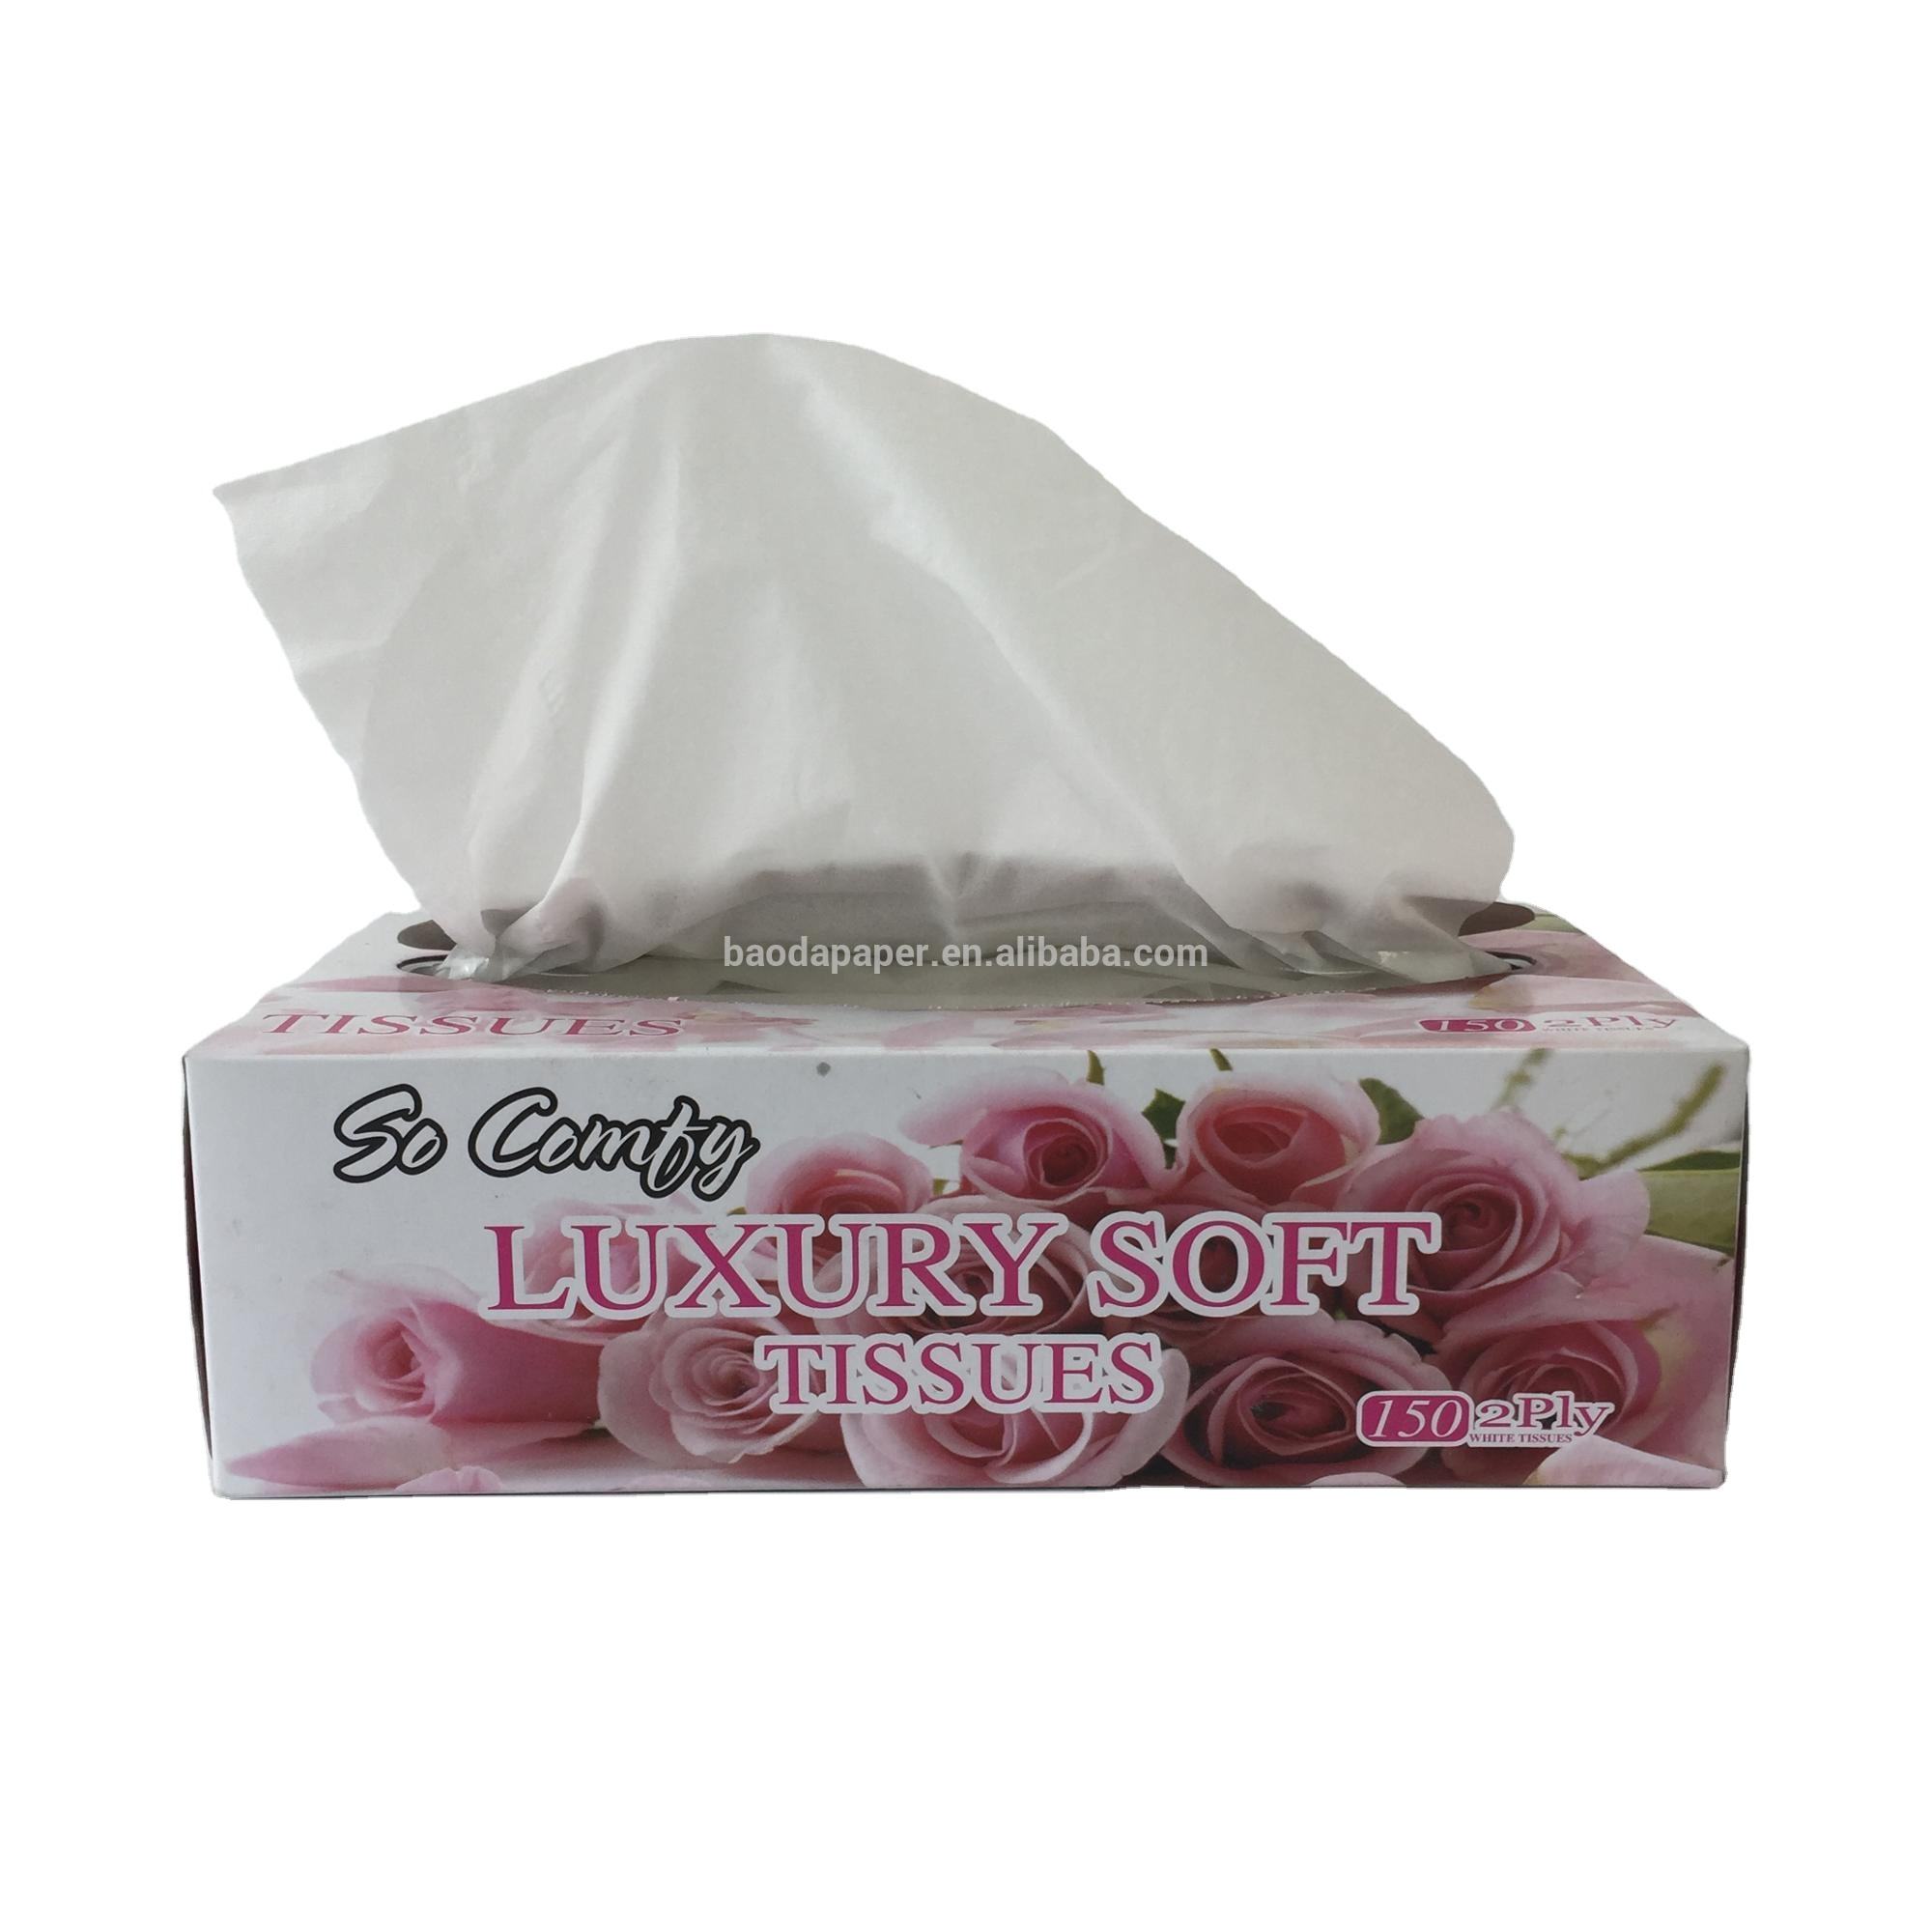 hot sale and ultra soft custom colorful box facial tissues 100 sheets 120 sheets in London